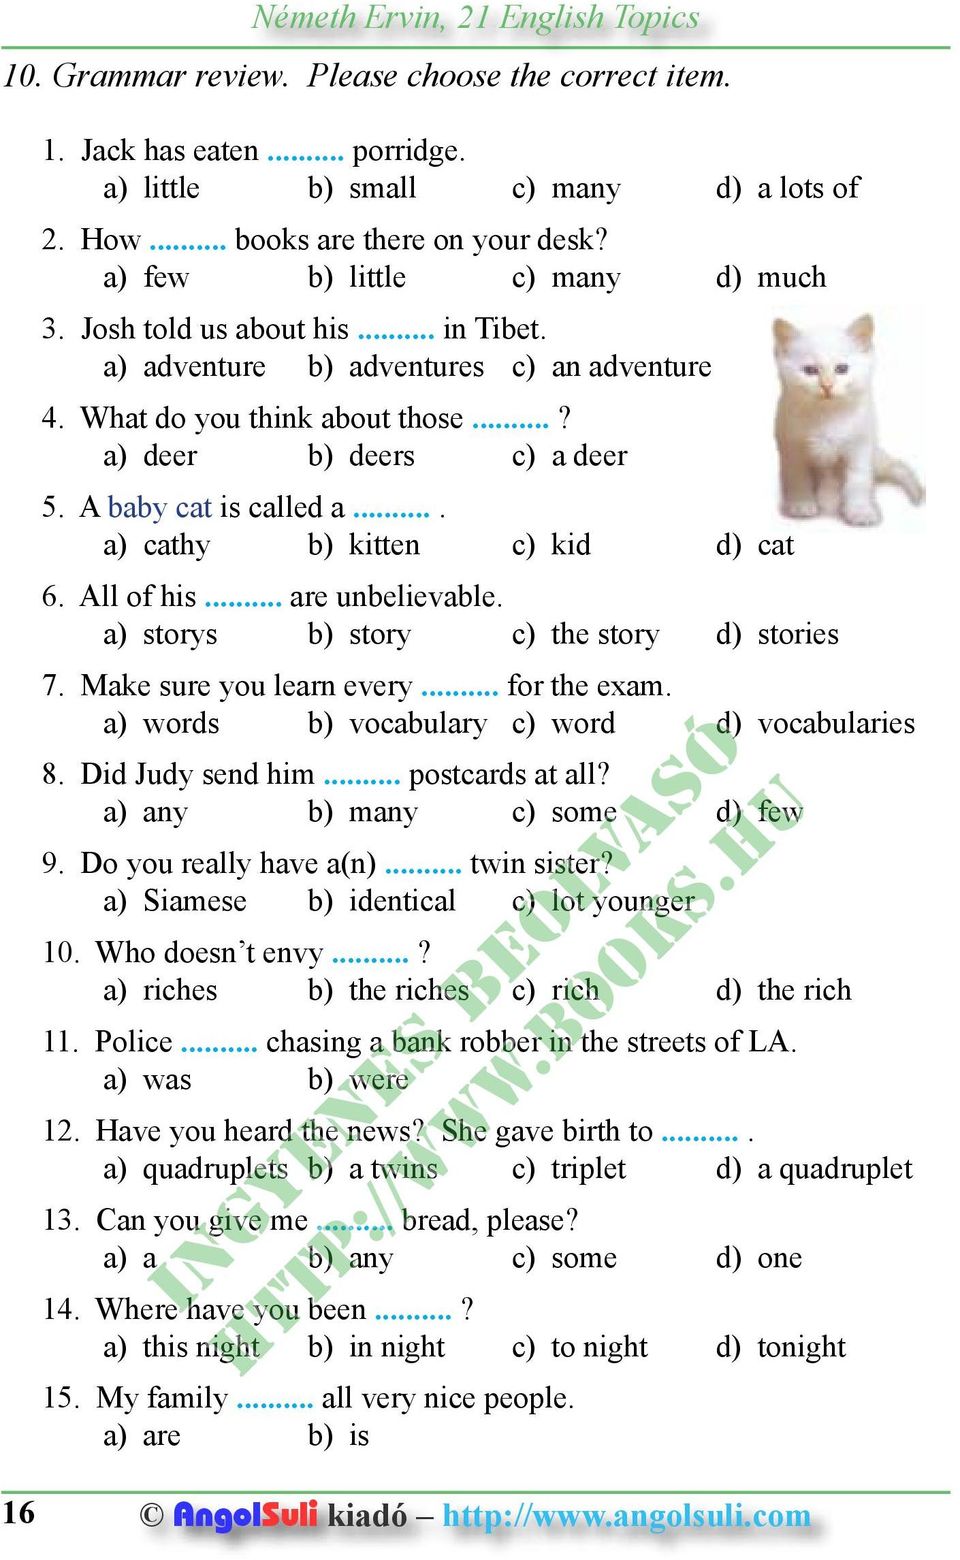 ... a) cathy b) kitten c) kid d) cat 6. All of his... are unbelievable. a) storys b) story c) the story d) stories 7. Make sure you learn every... for the exam.